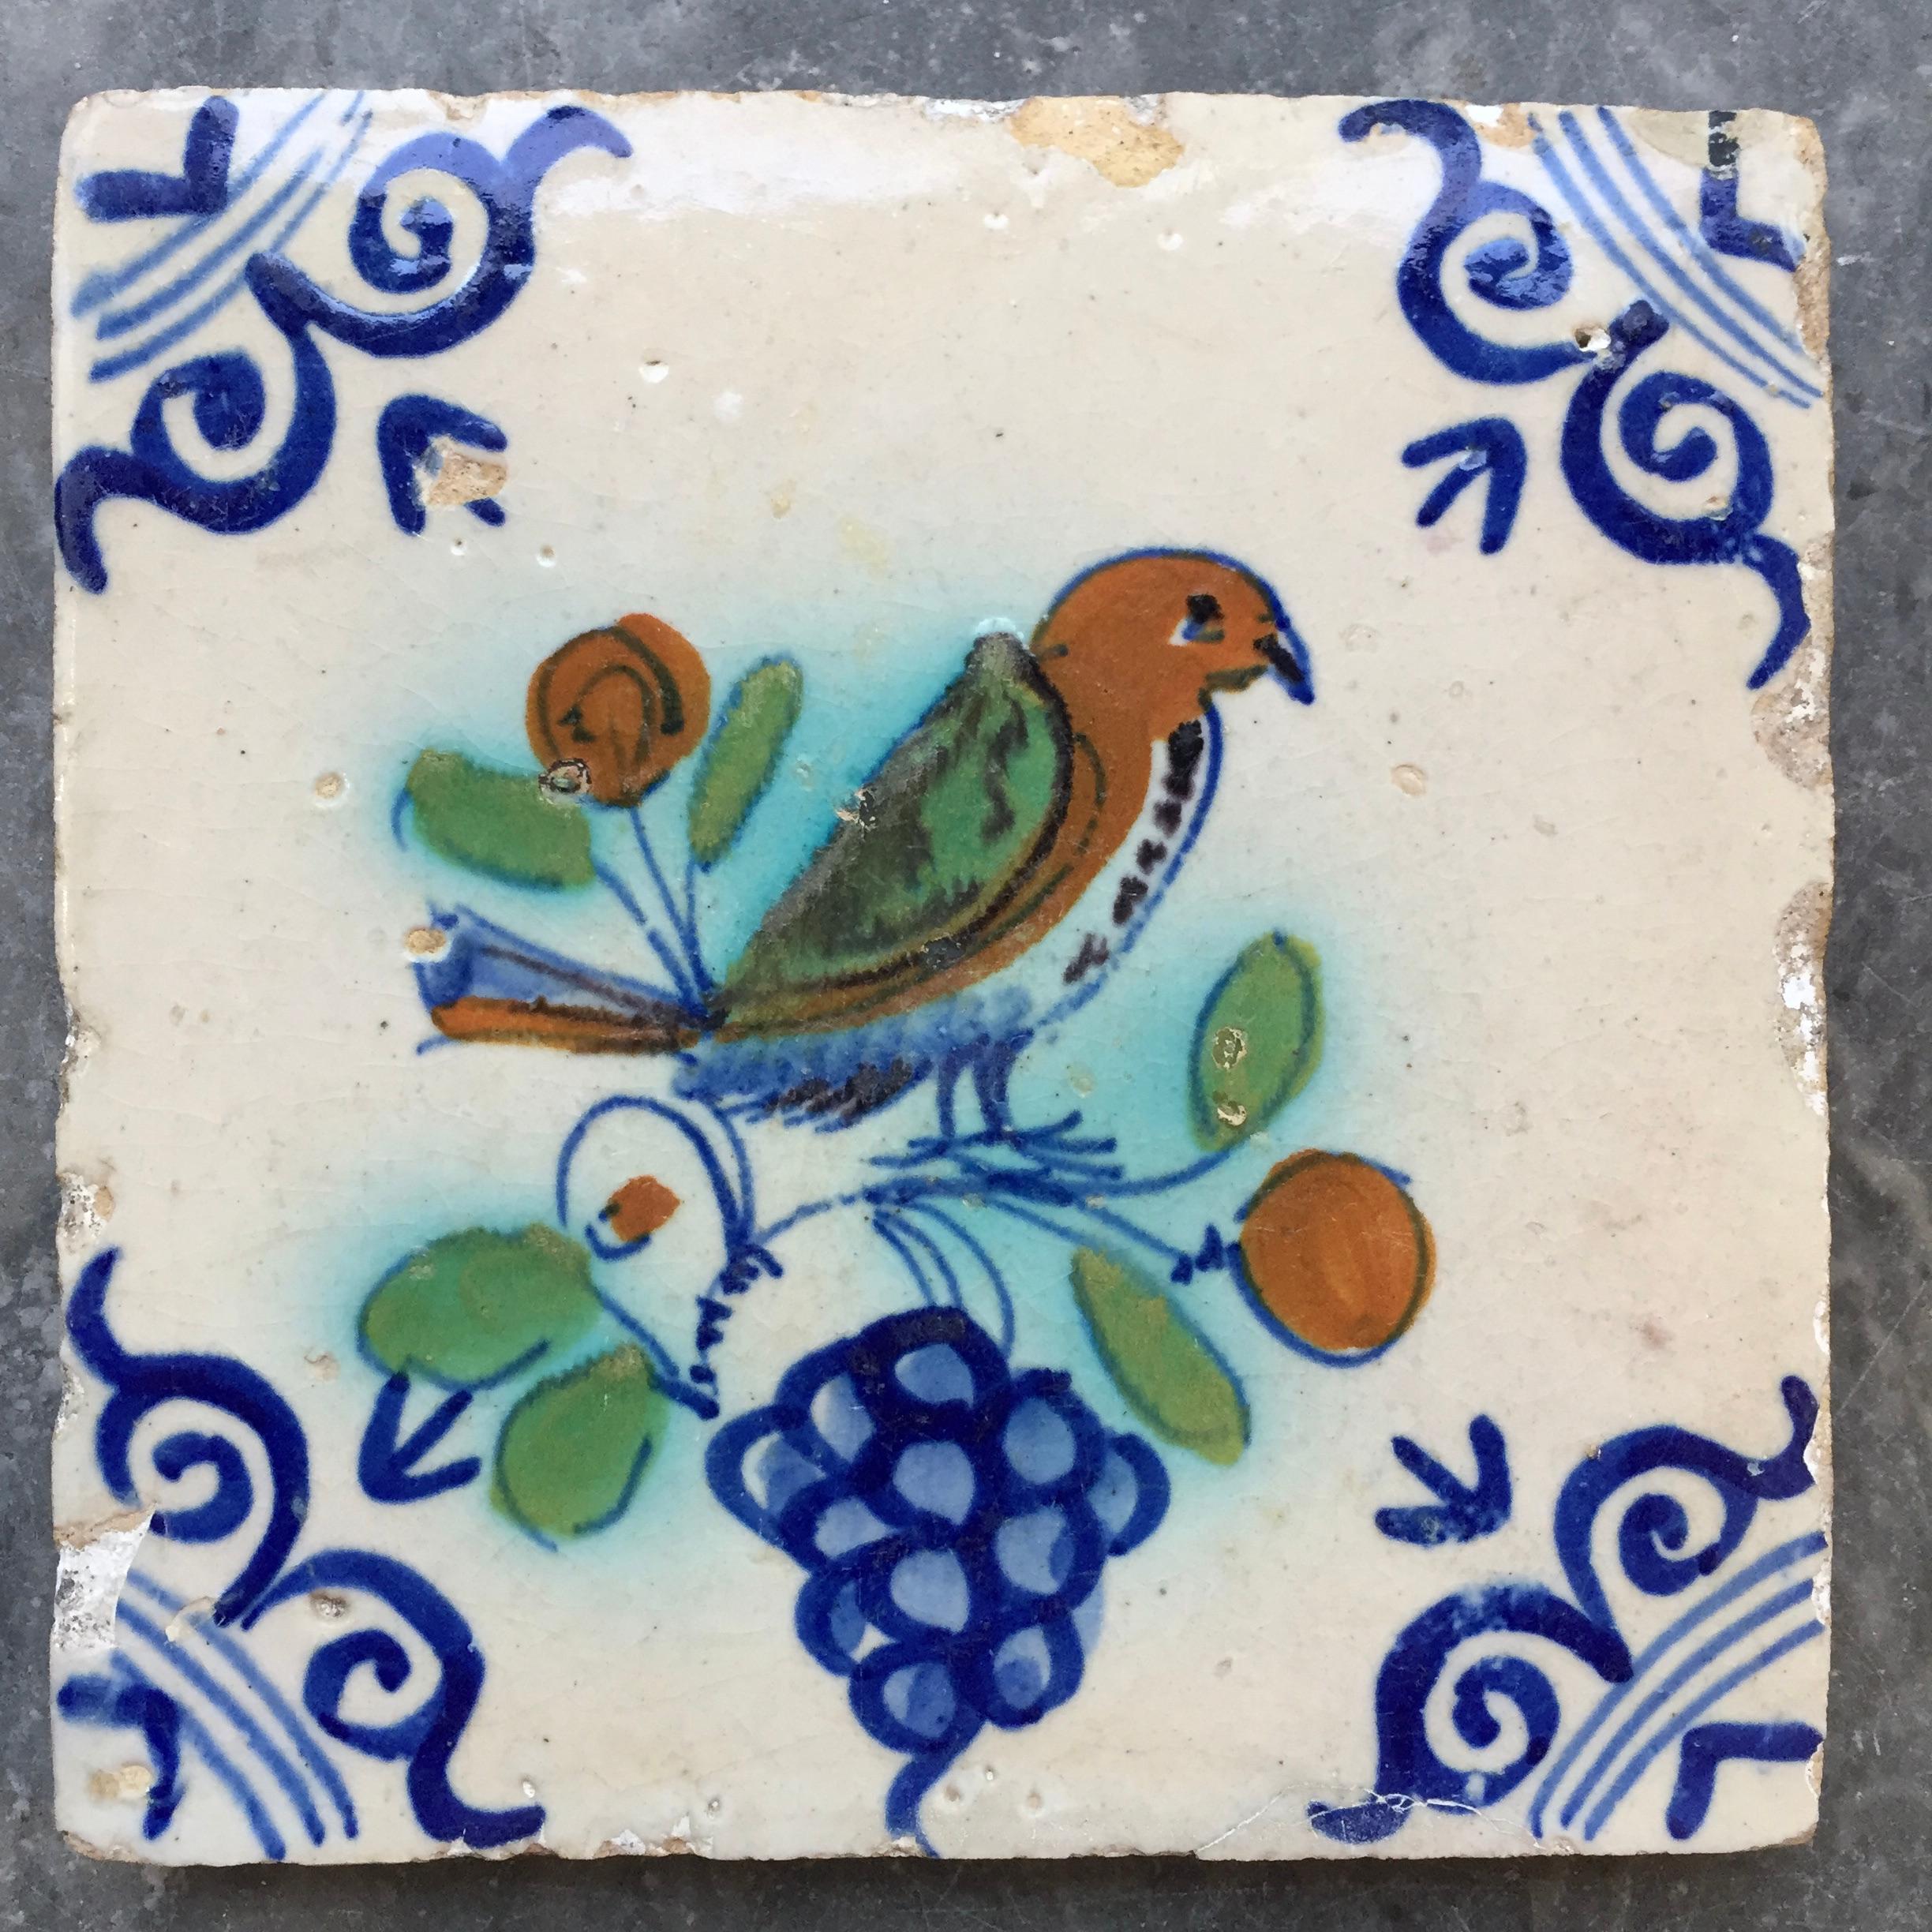 The Netherlands
Circa 1620 - 1640

A Dutch Delft tile painted with a fine and large bird sitting on a grapevine. A nice large image, fine painted, and bright colors. 
With so-called oxheads as corner decoration.

A genuine collectible of 400